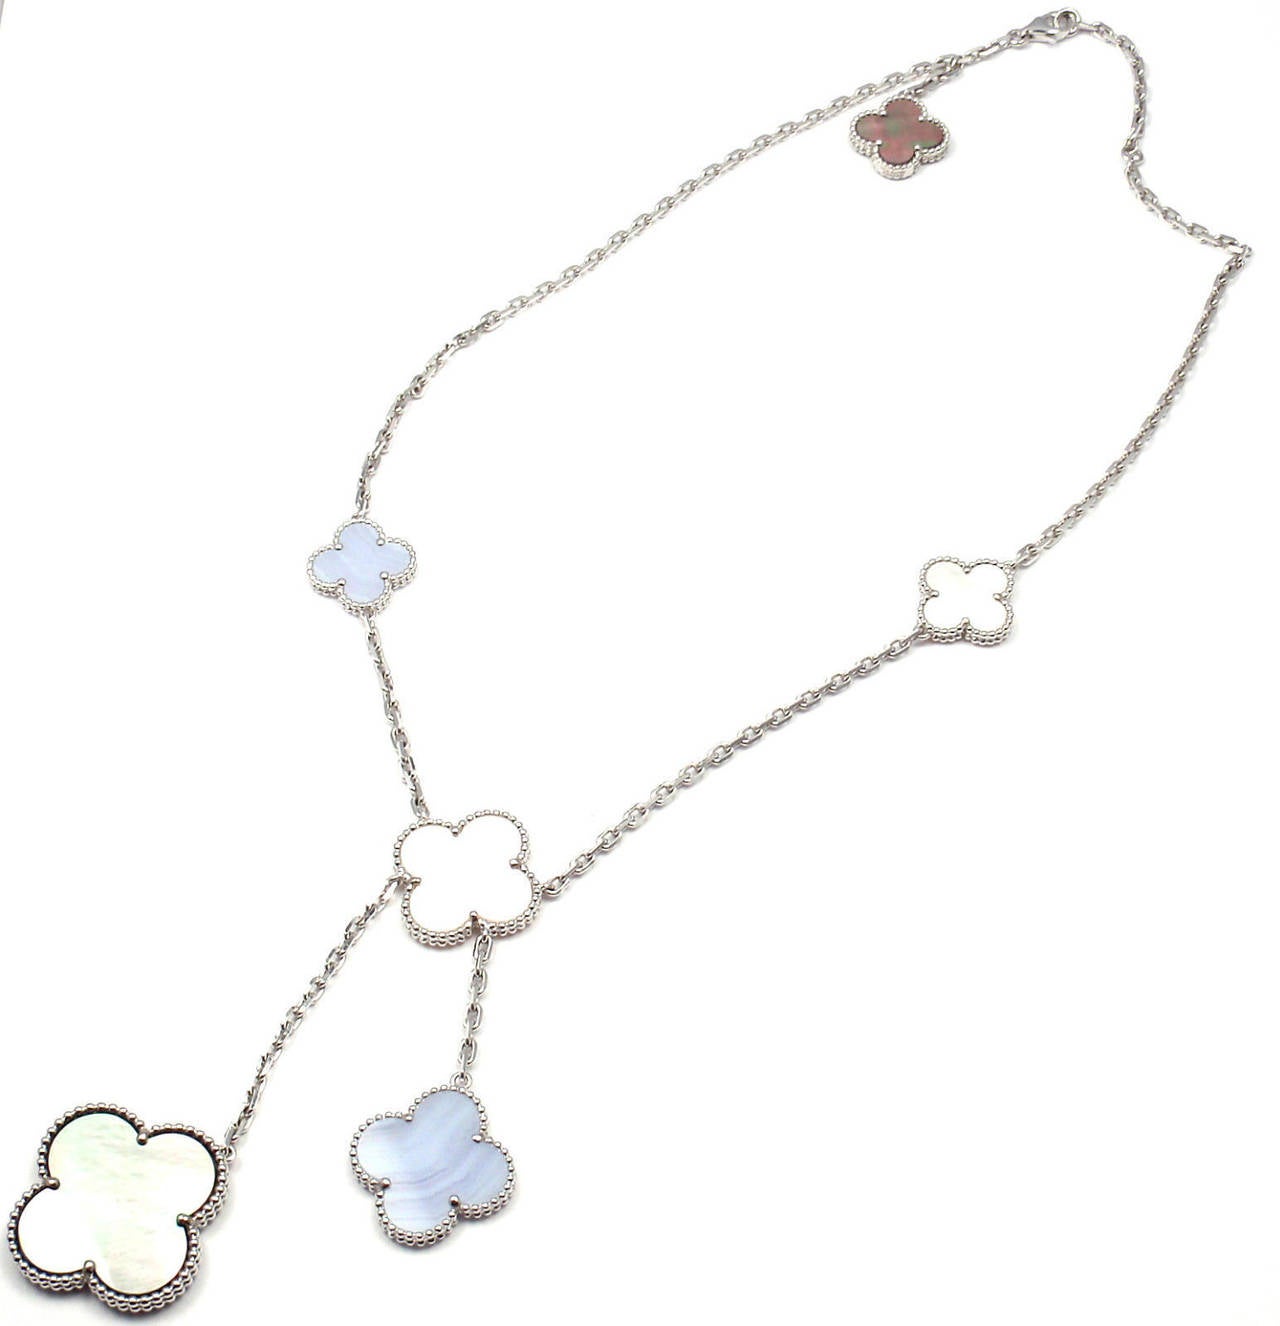 Van Cleef & Arpels Magic Alhambra 18k White Gold 6 Motif Chalcedony, White & Grey Mother of Pearl Necklace.
This necklace comes with VCA certificate.

Metal: 18k White Gold
Length: 16.5